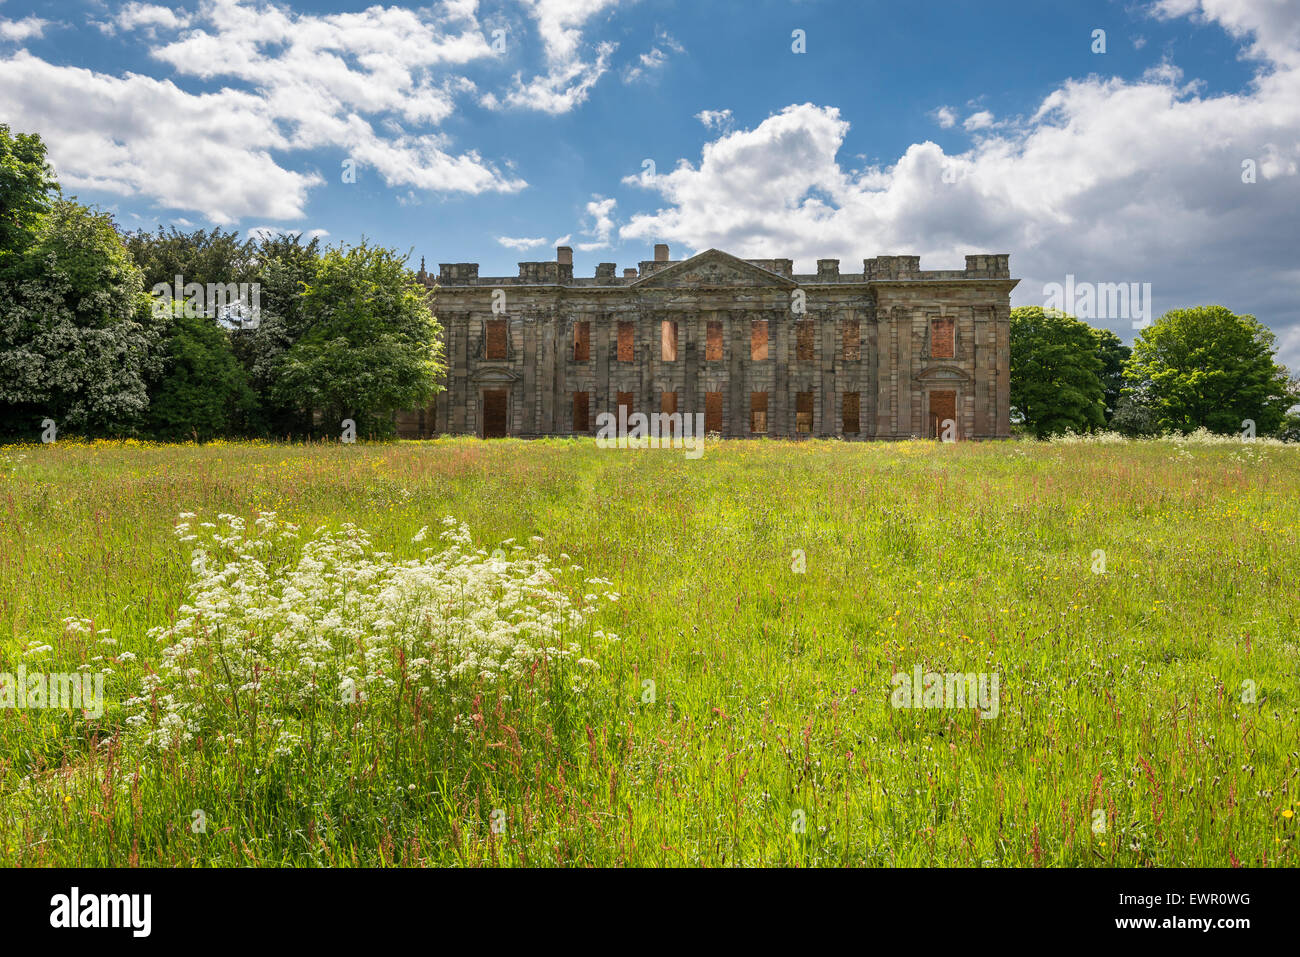 Sutton Scarsdale Hall. The ruin of a Stately home near Chesterfield in Derbyshire, England. Stock Photo